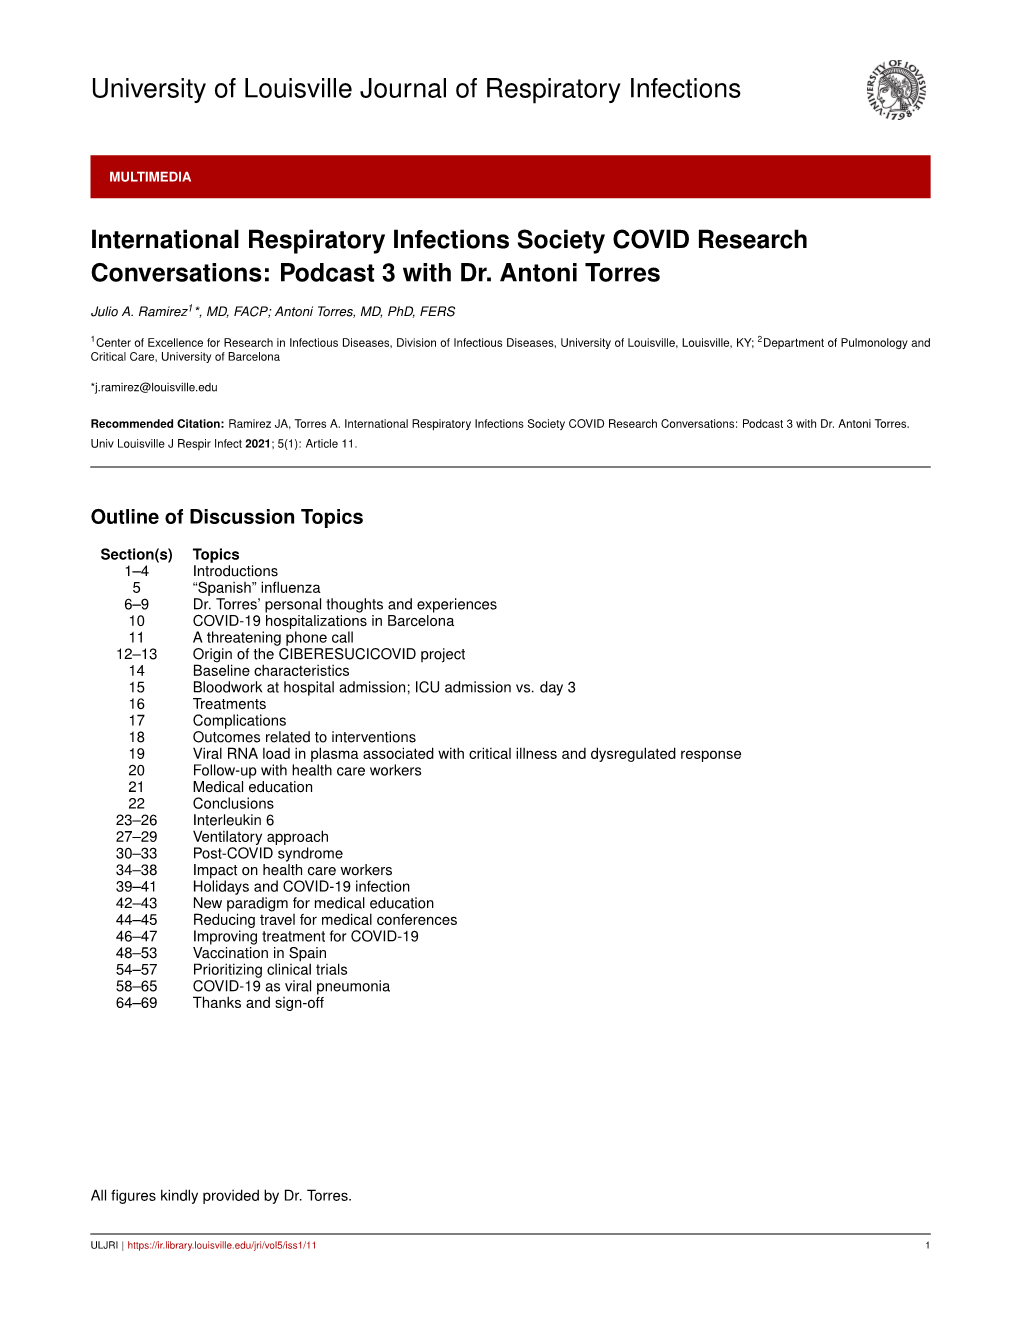 International Respiratory Infections Society COVID Research Conversations: Podcast 3 with Dr